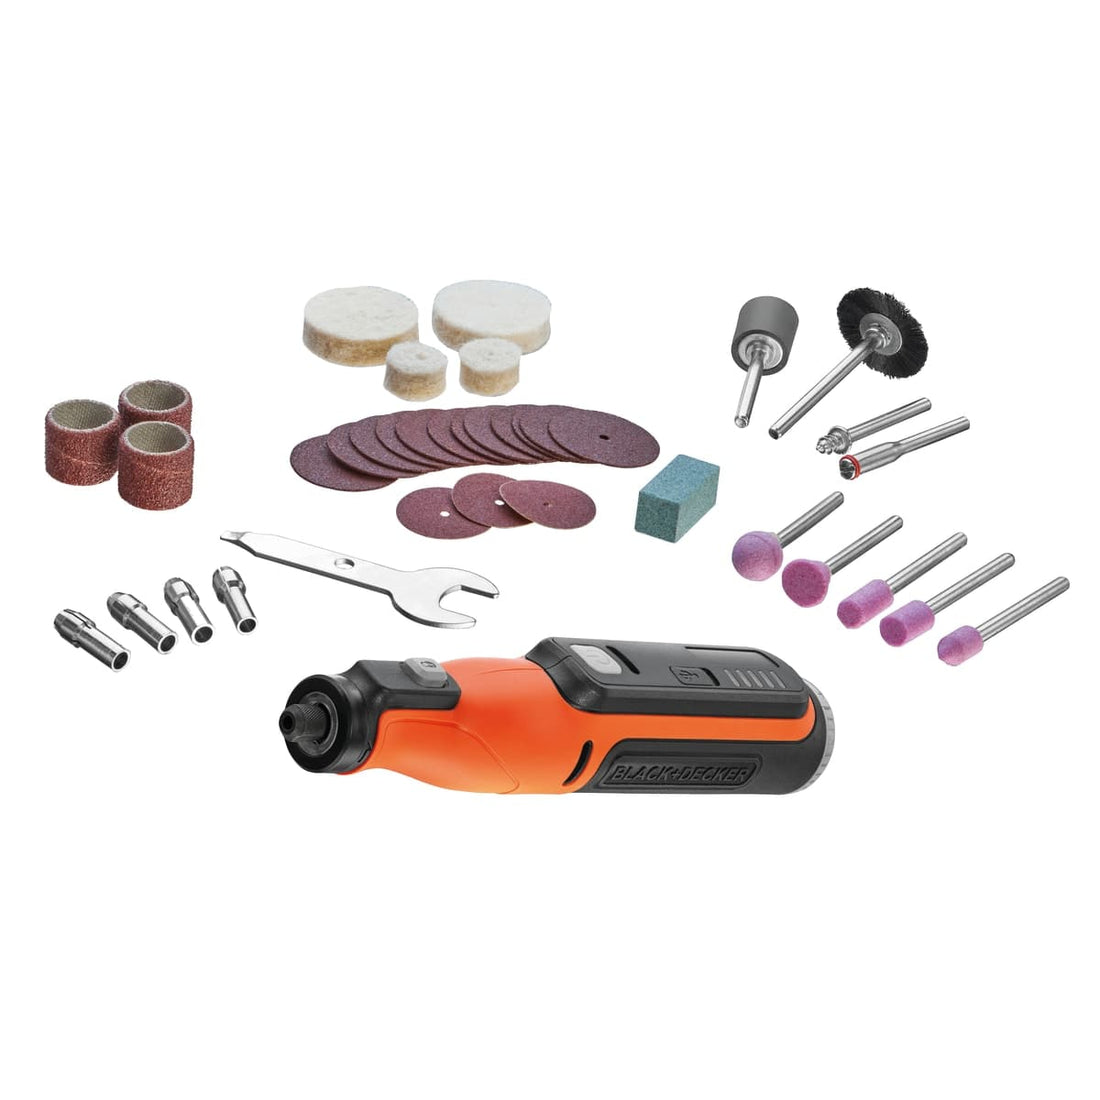 BLACK+DECKER 7.2V ROTARY MINI-TOOL WITH ACCESSORIES - best price from Maltashopper.com BR400003051